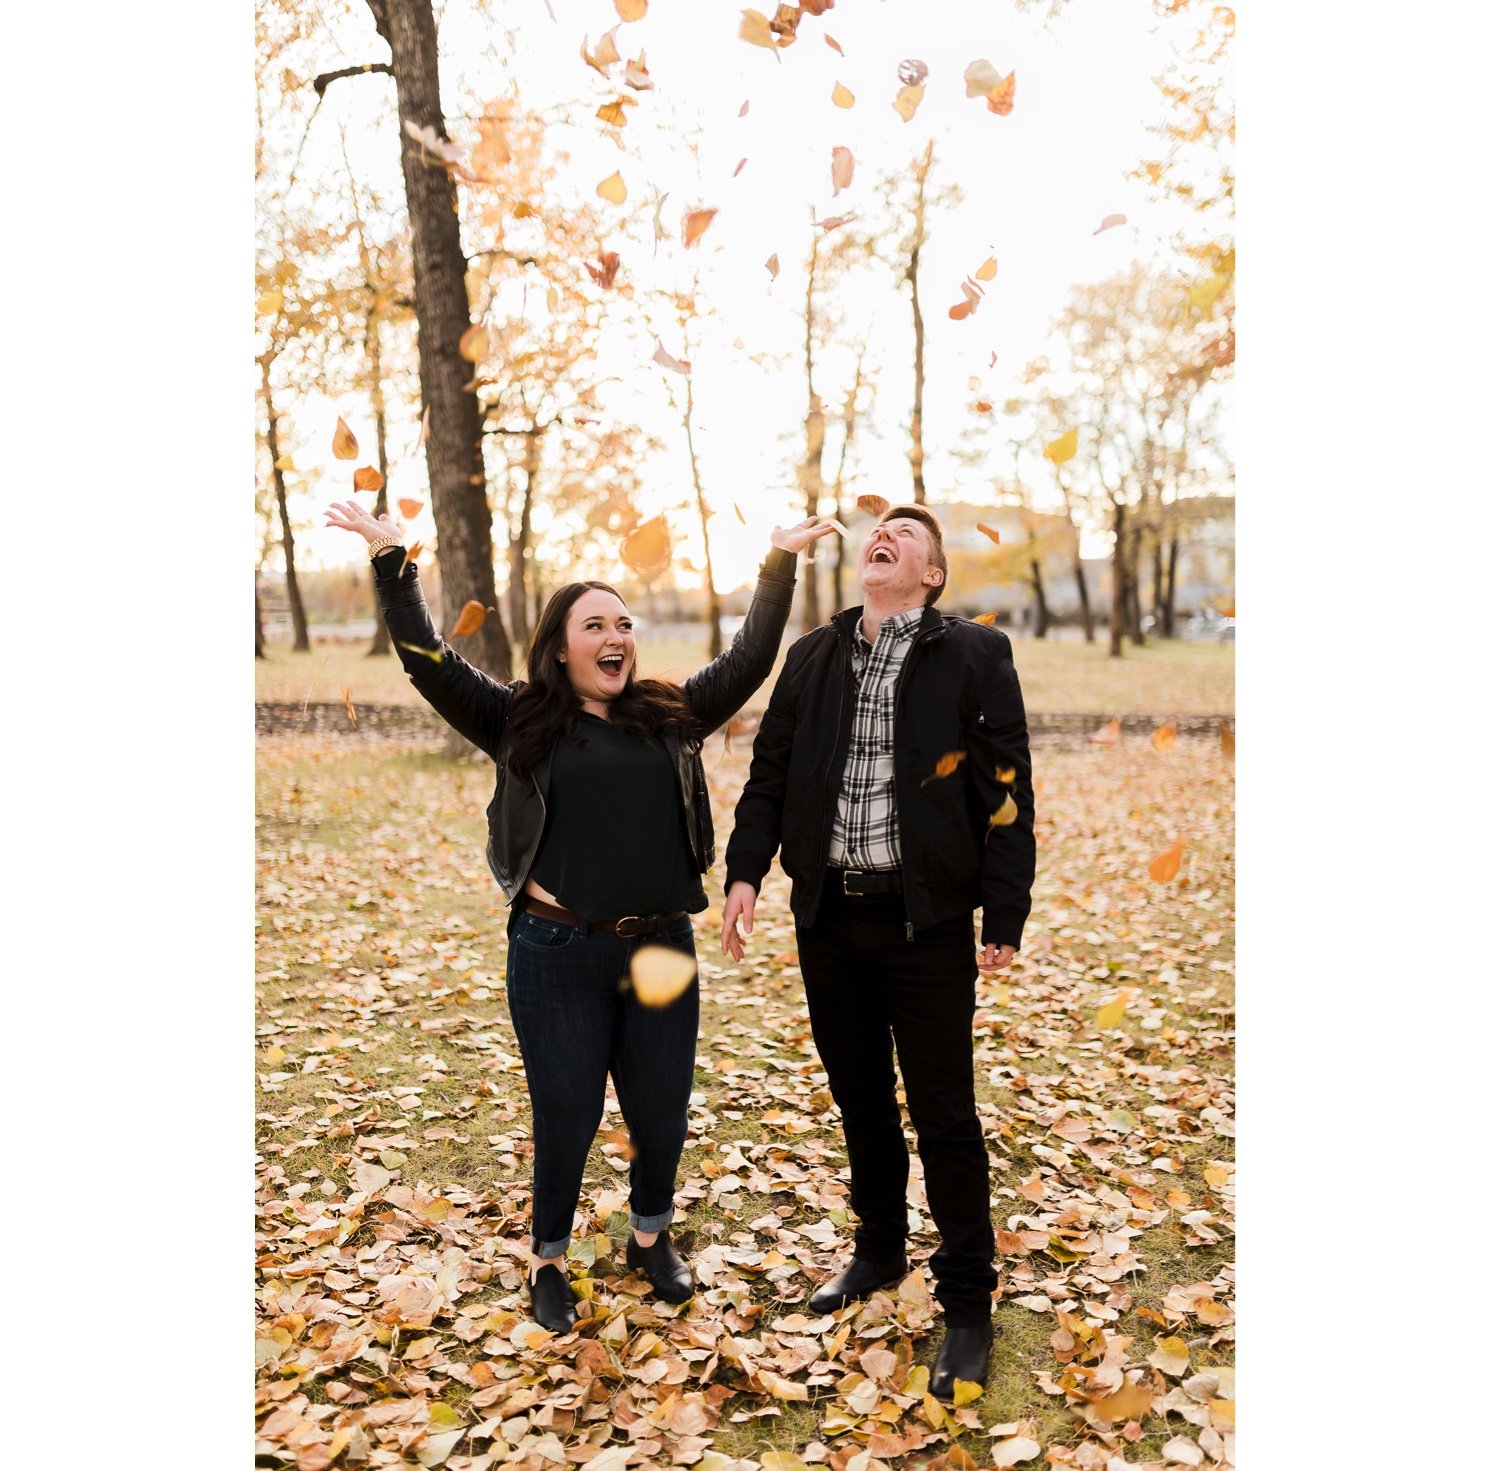 30_2018 29485_sunlight_landscape_trees_couple_engagement_close_Calgary_cuddle_kiss_simple_golden_hour_intimate_nature_autumn_soft_fiancee_delicate_bride_Alberta_photographer_forest_groom_outdoor.jpg